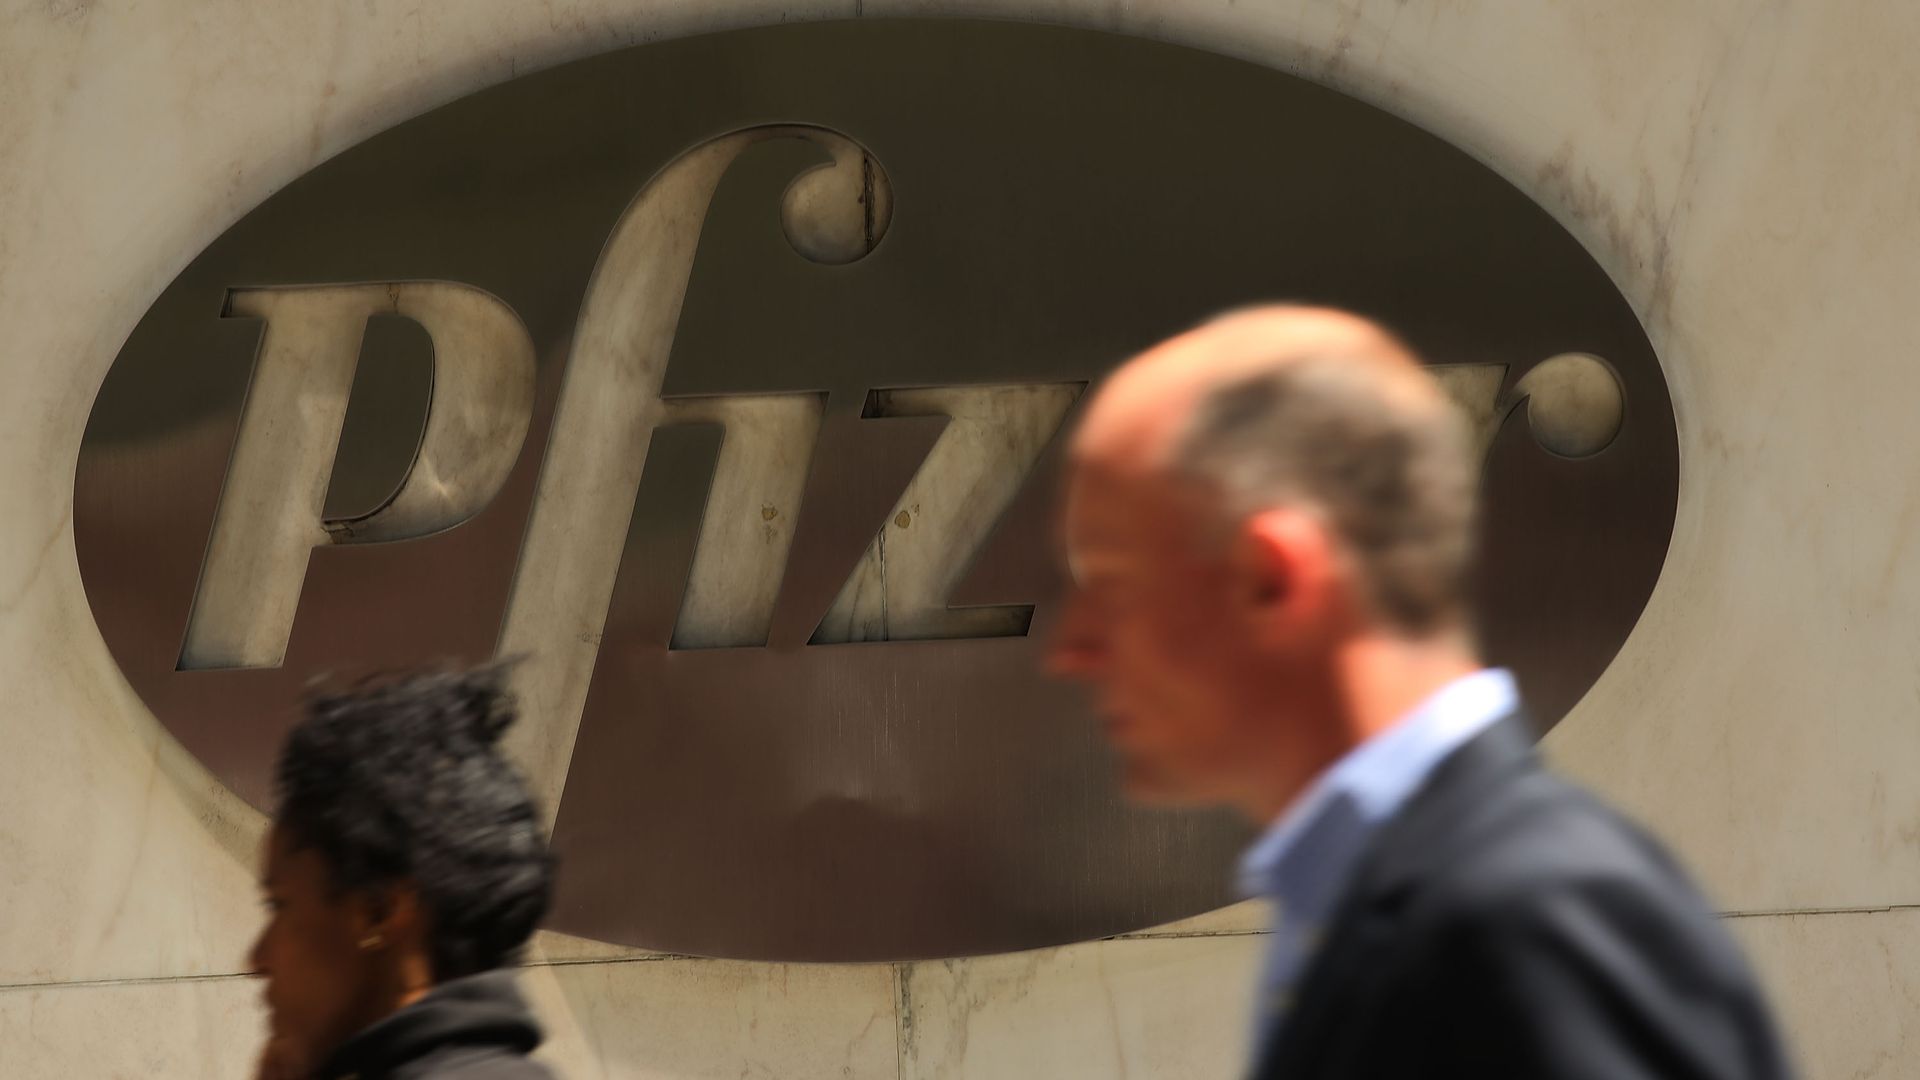 In this image, a man and a woman walk past a large metal logo for Pfizer